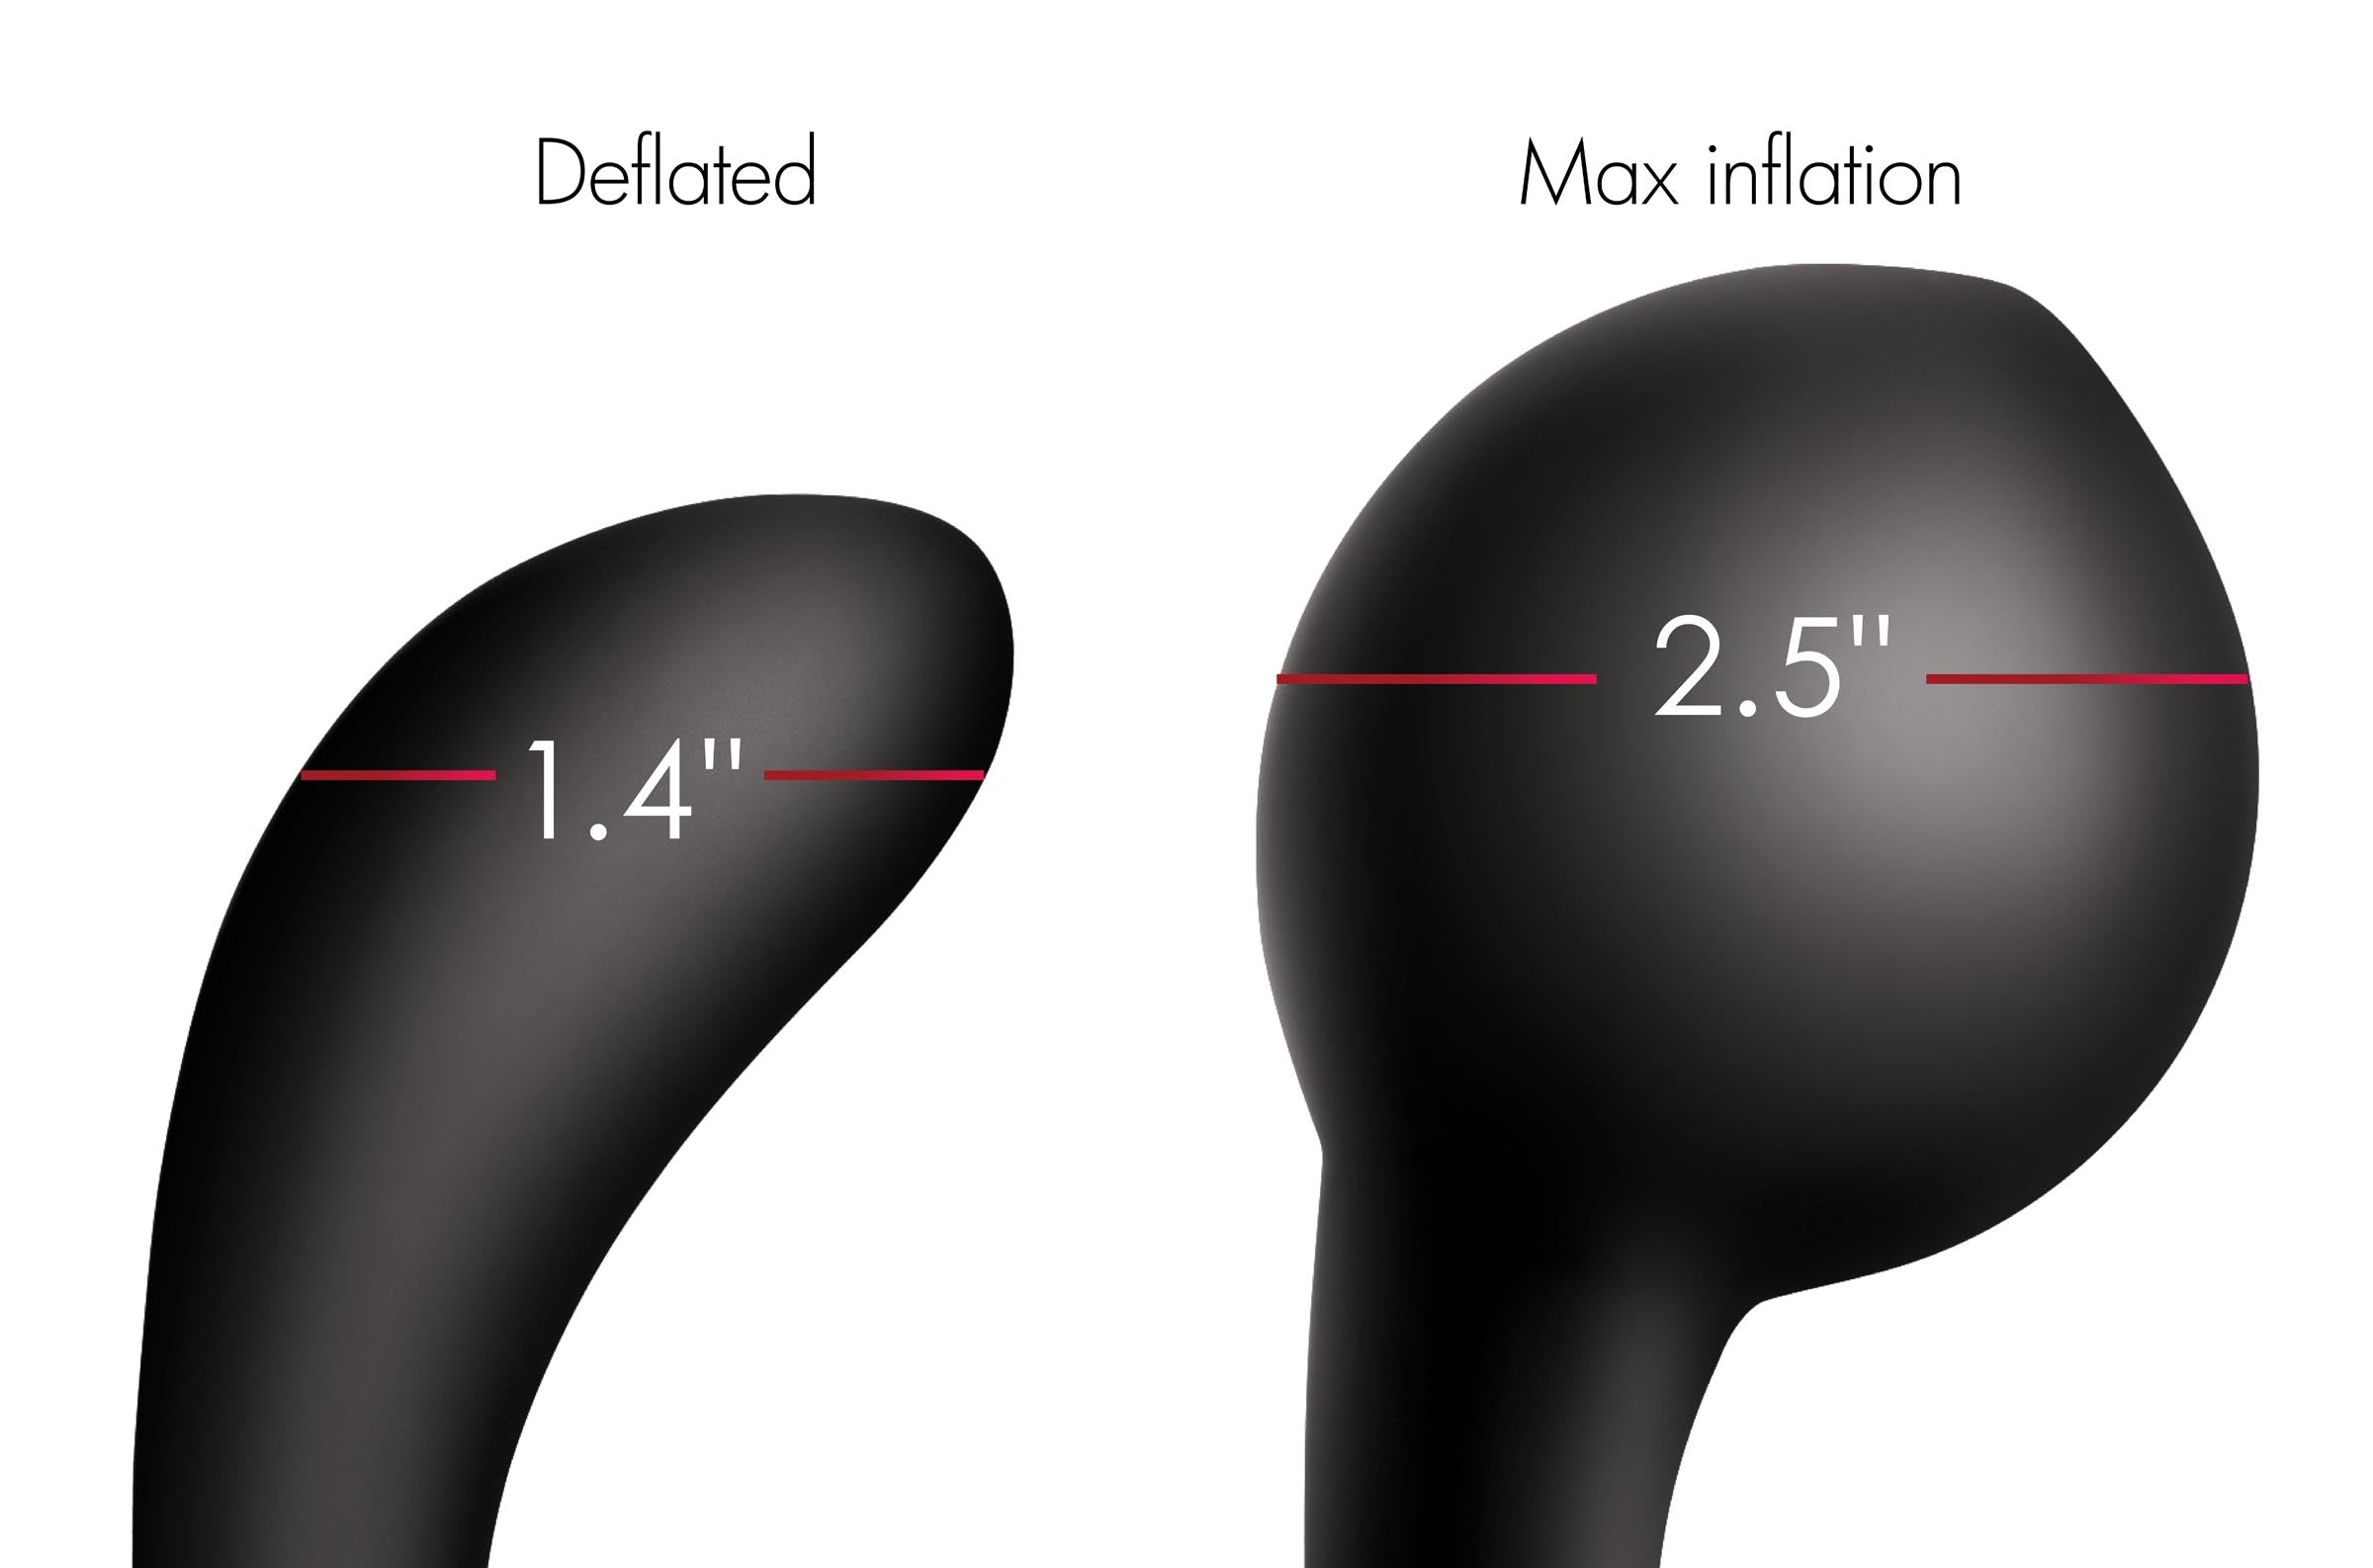 10X Inflatable and Vibrating Silicone Prostate Plug